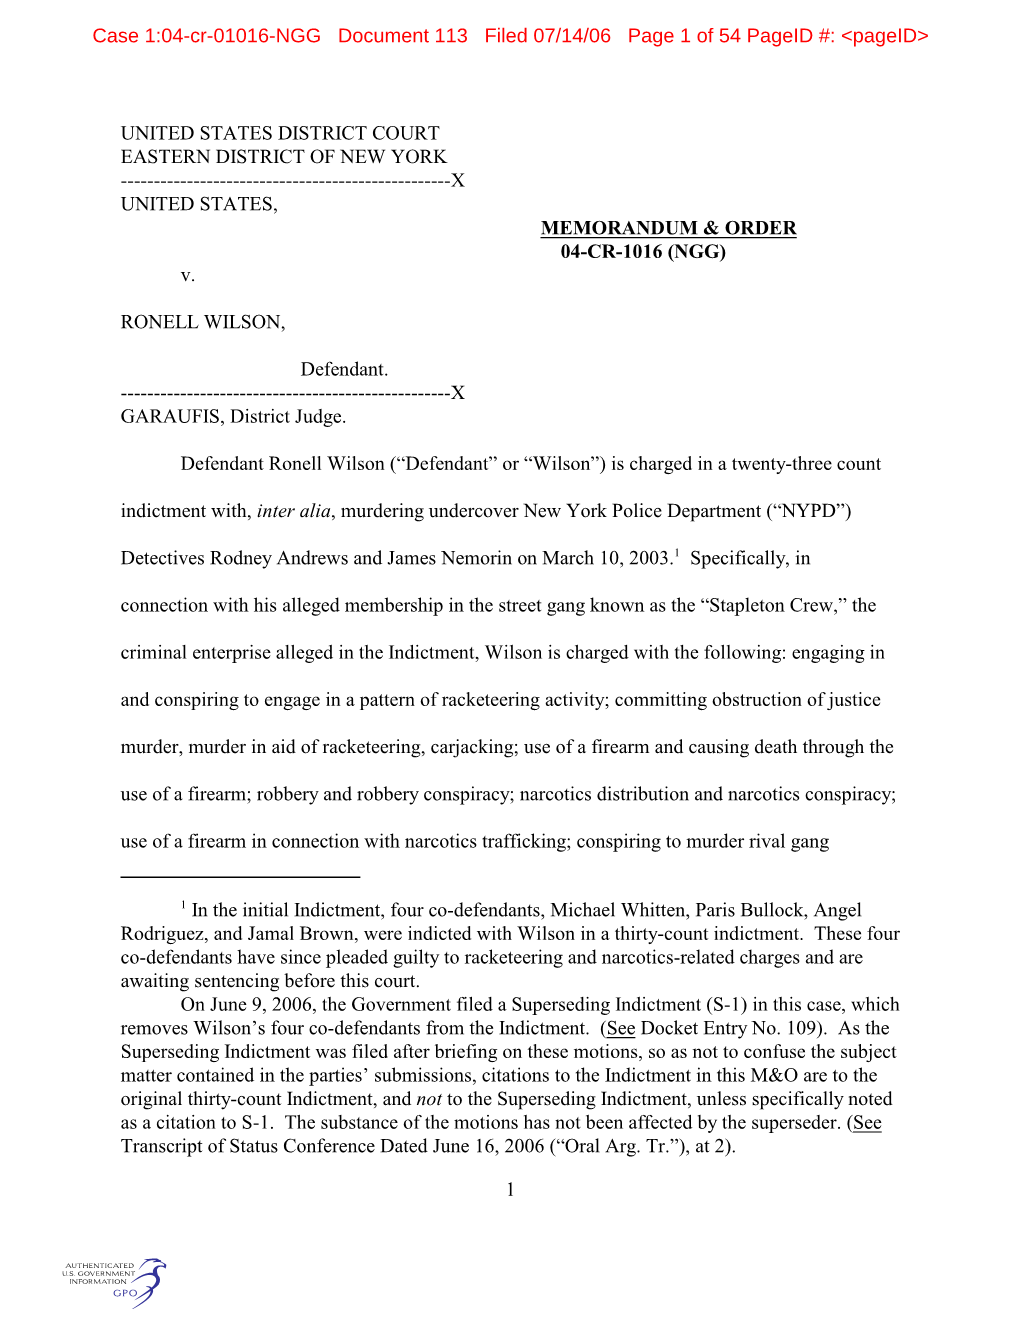 In the Initial Indictment, Four Co-Defendants, Michael Whitten